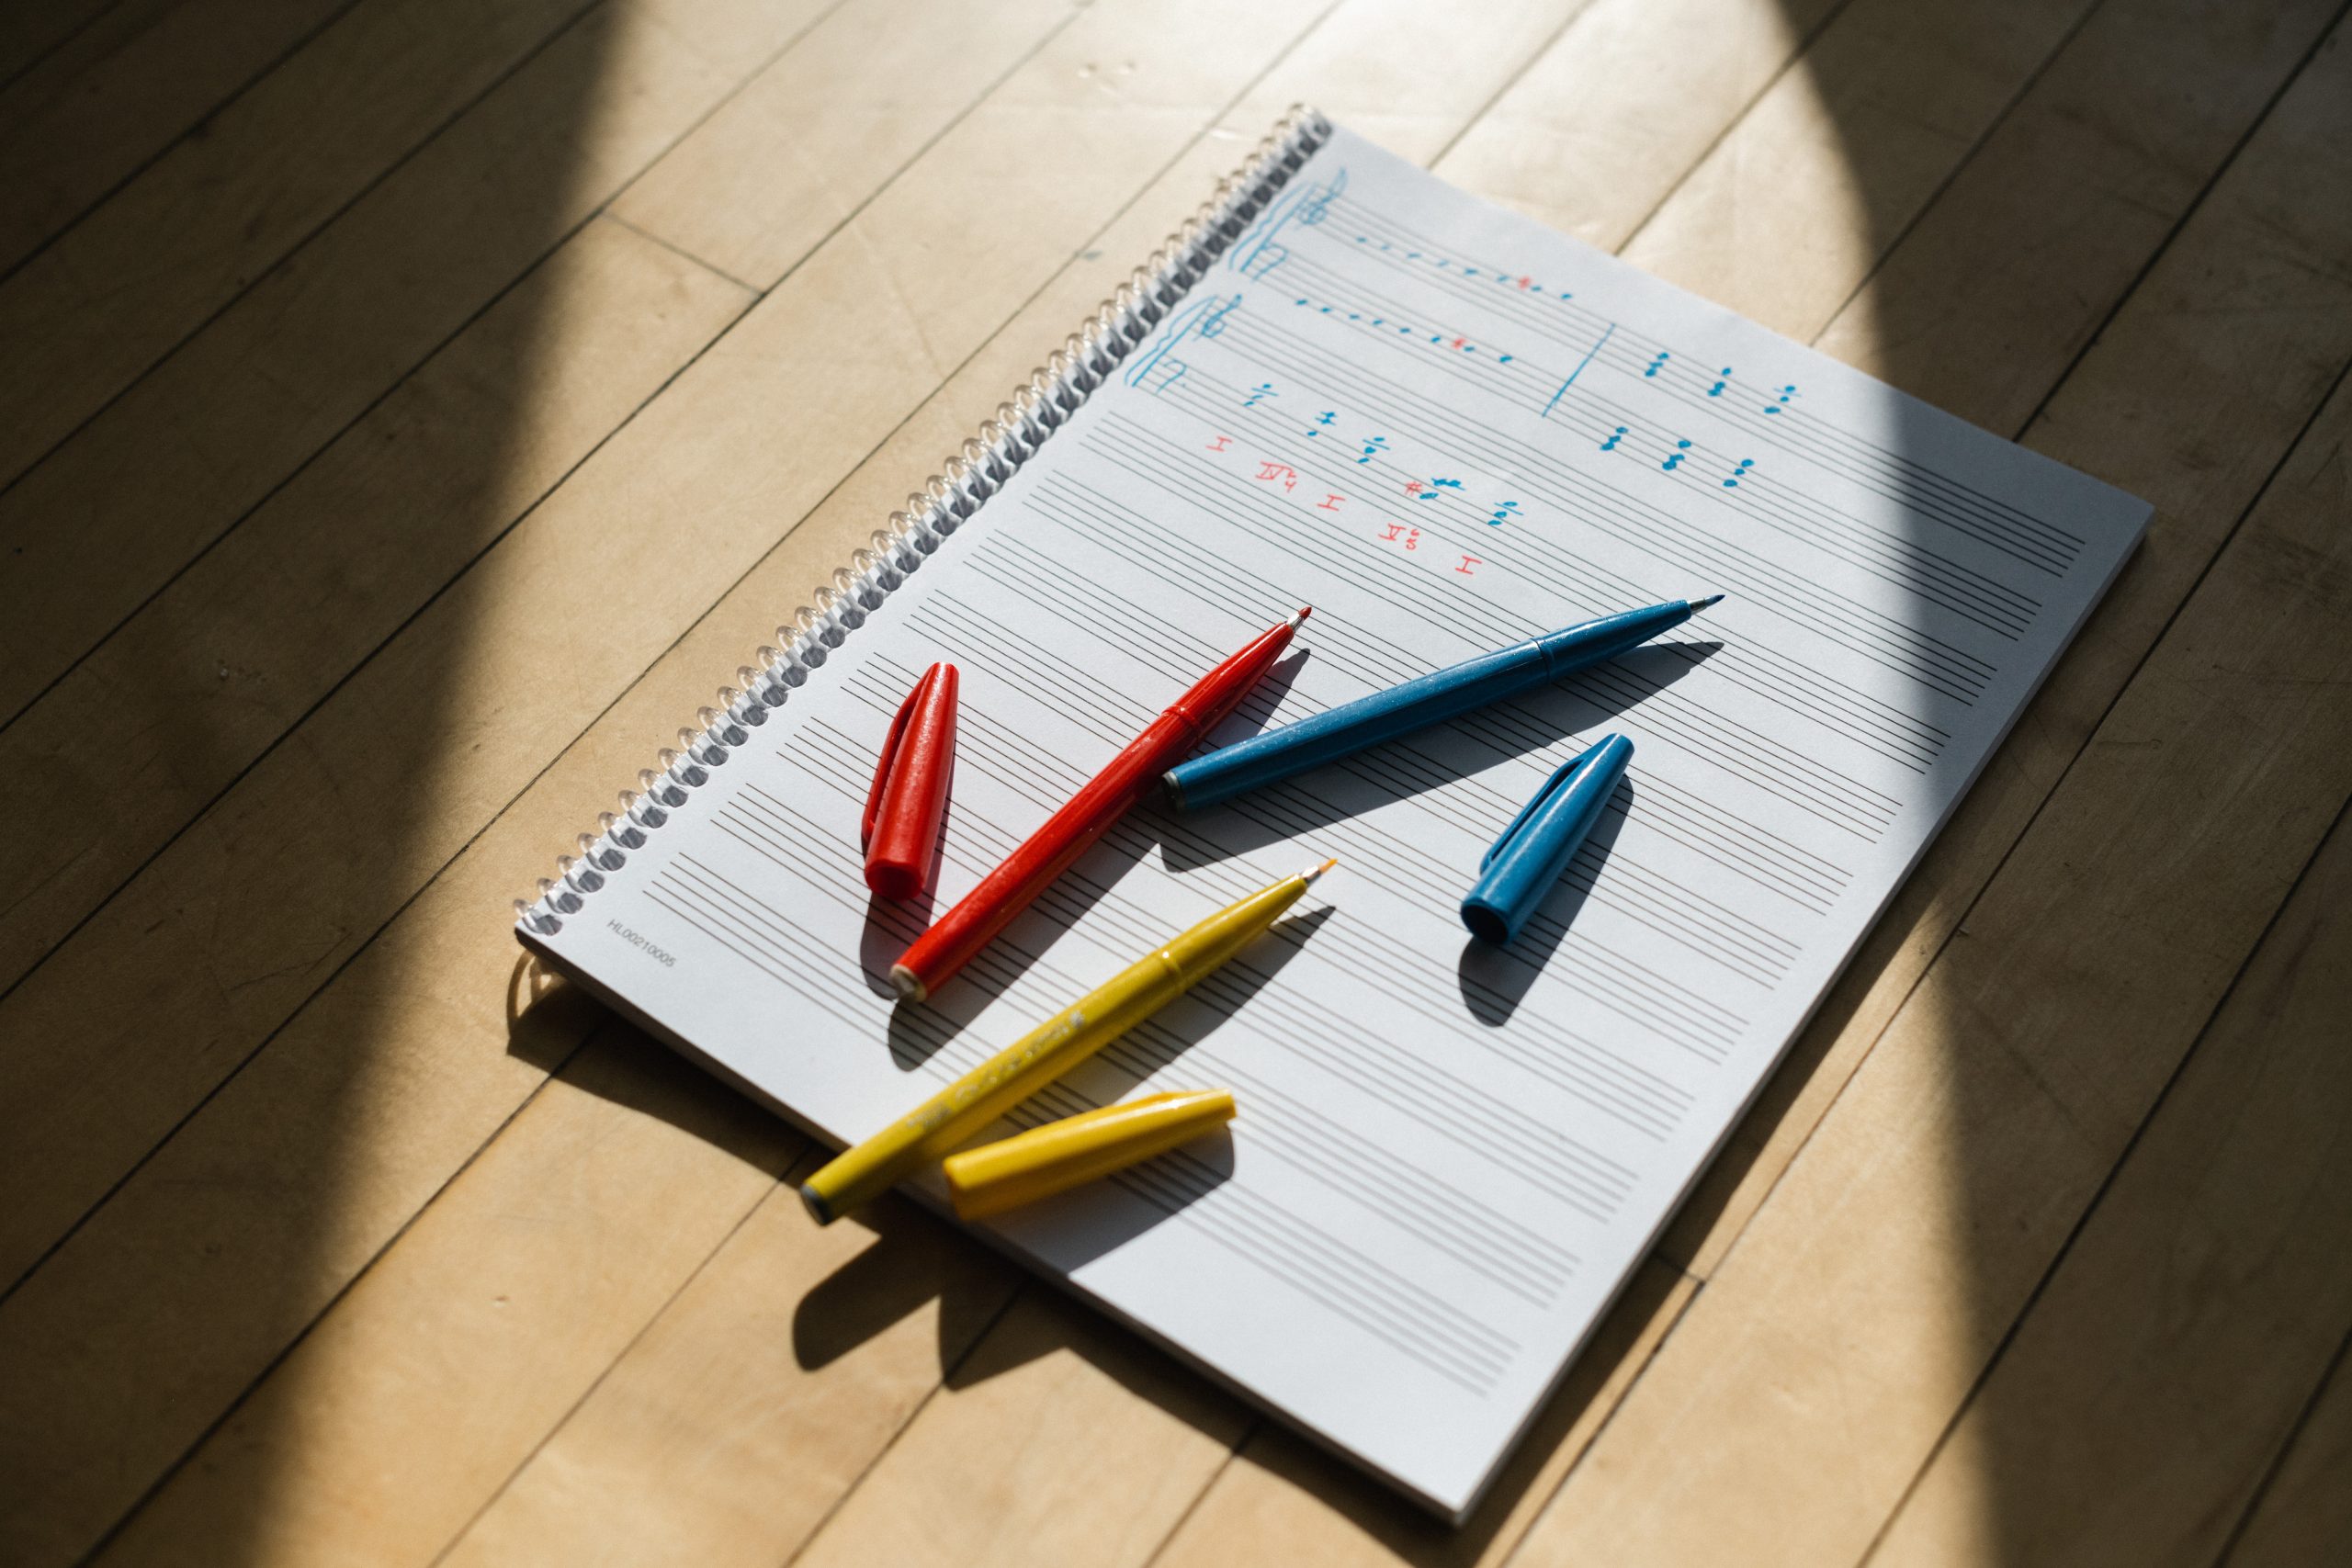 An image of a notebook containing music staff and on top are colorful pens and pencils